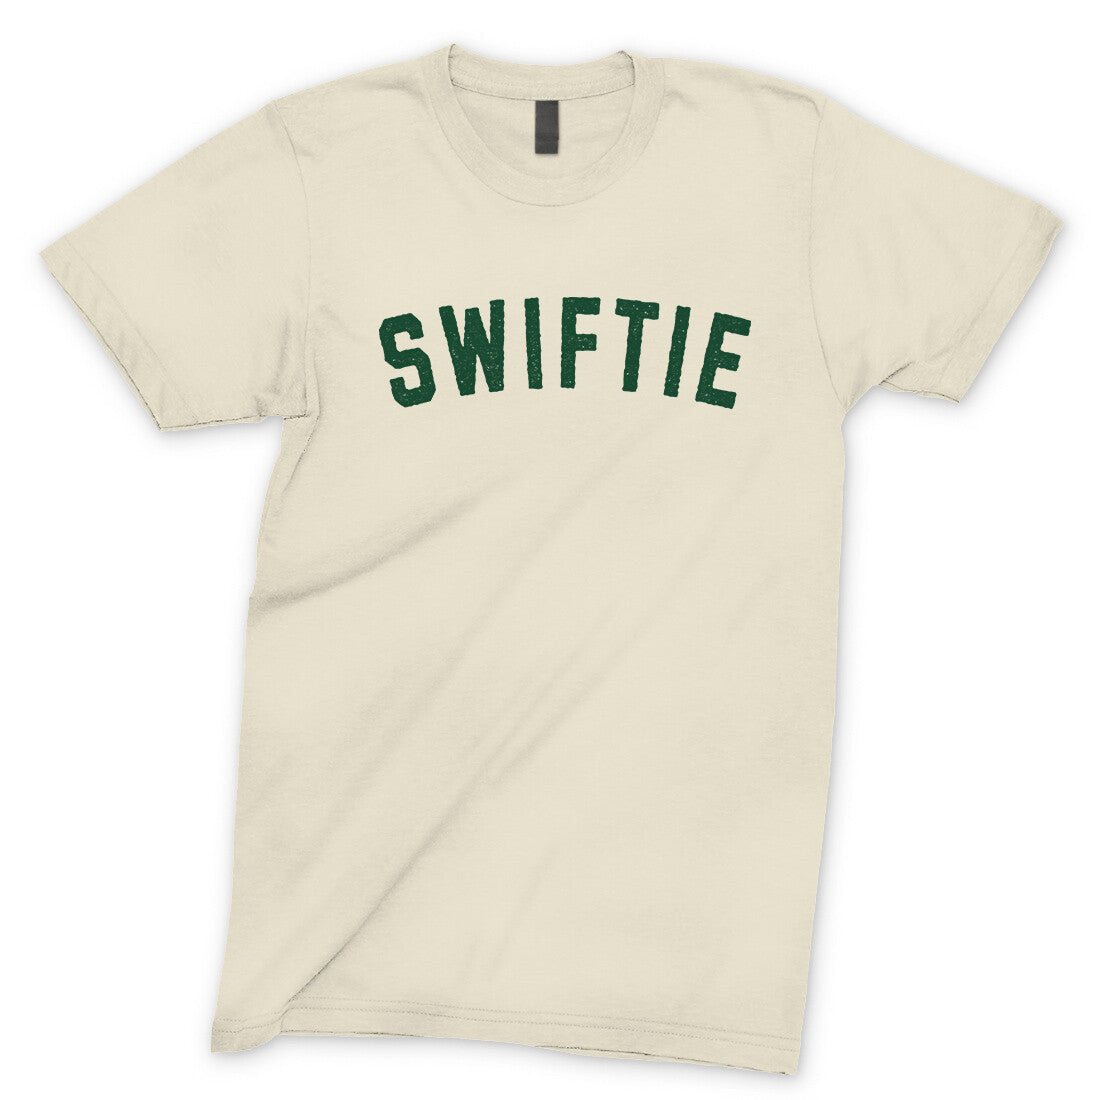 Swiftie in Natural Color